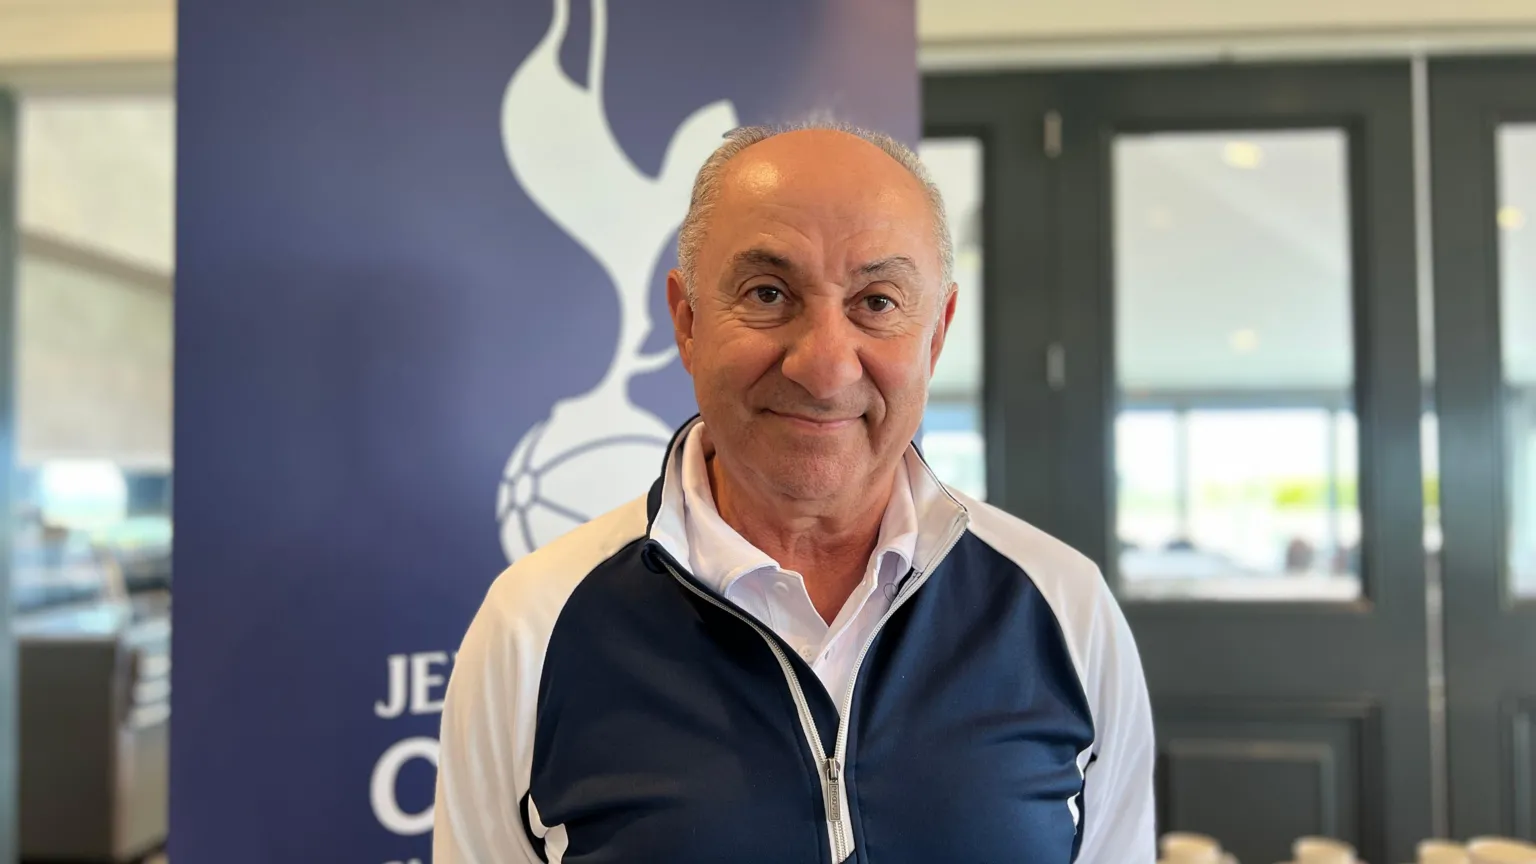 Ossie smiles at the camera with a Jersey Spurs Supports banner pulled up behind him in the golf club